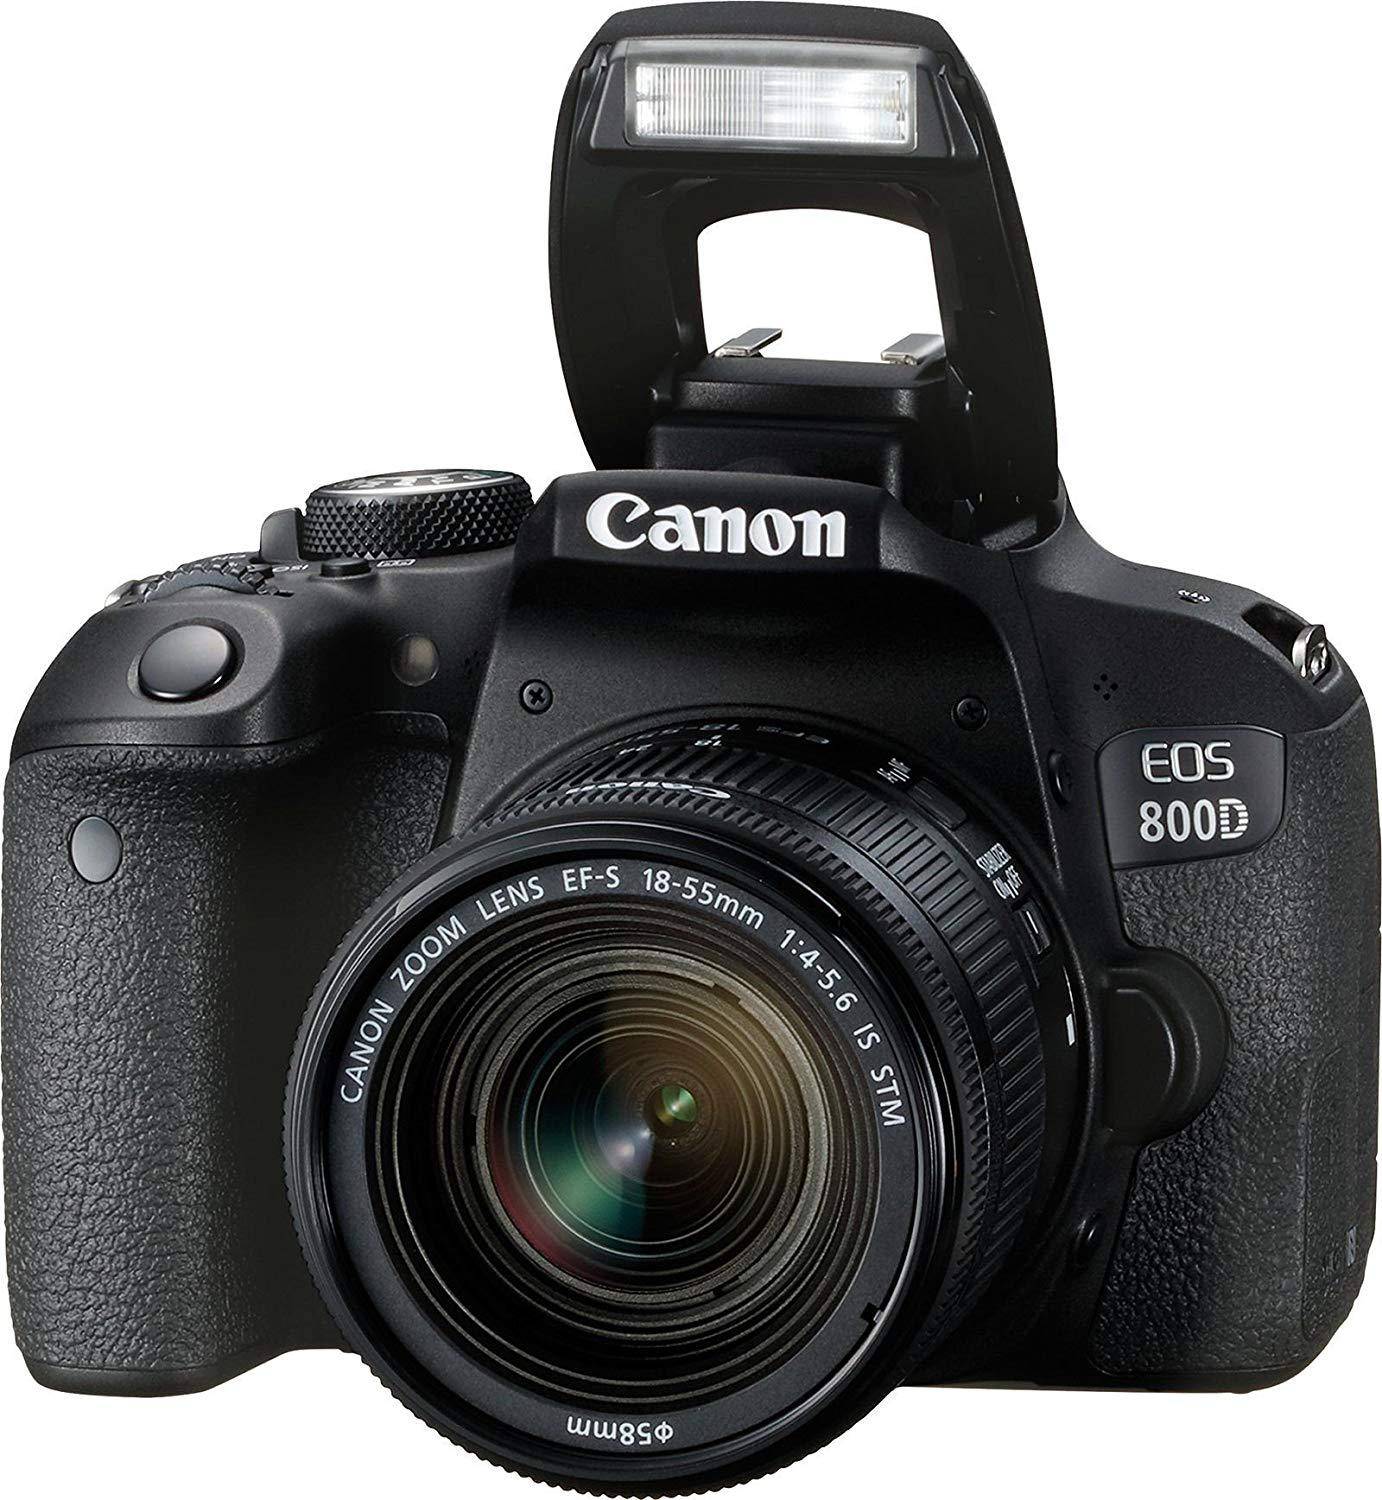 Canon EOS 800D DSLR Camera with EF-S 18-55mm STM Lens + Free 16GB Memory Card and Camera Bag zoom image